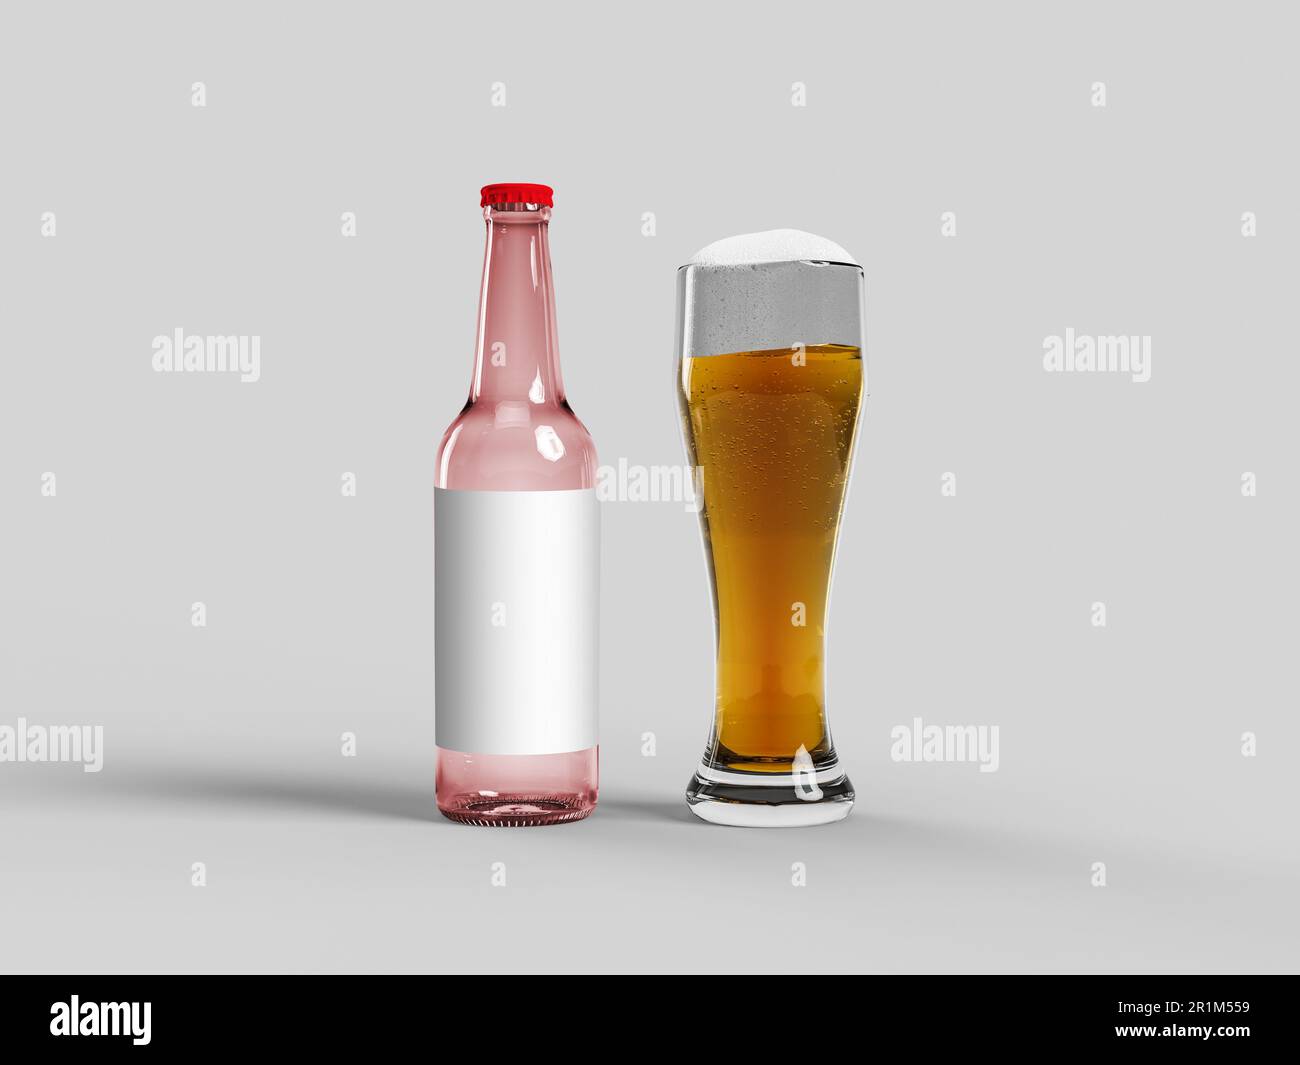 Red beer bottle and glass with golden lager on isolated, copy space, mock up oktoberfest Stock Photo